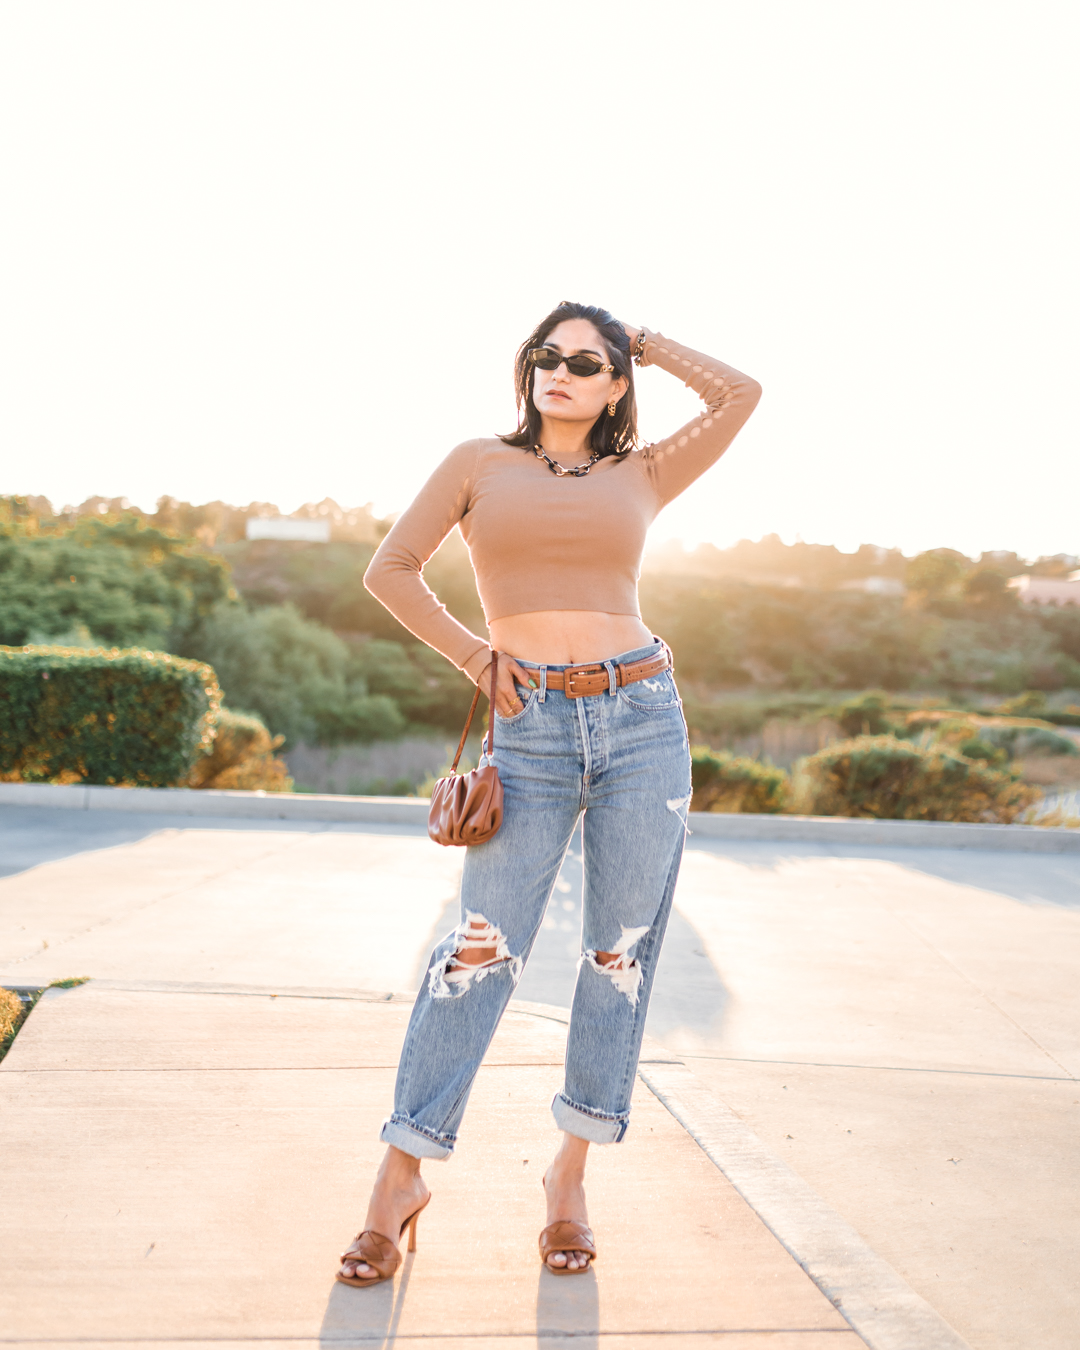 Best High Waisted denim Jeans Dielle Style | A Fashion Blog by Dielle Pike